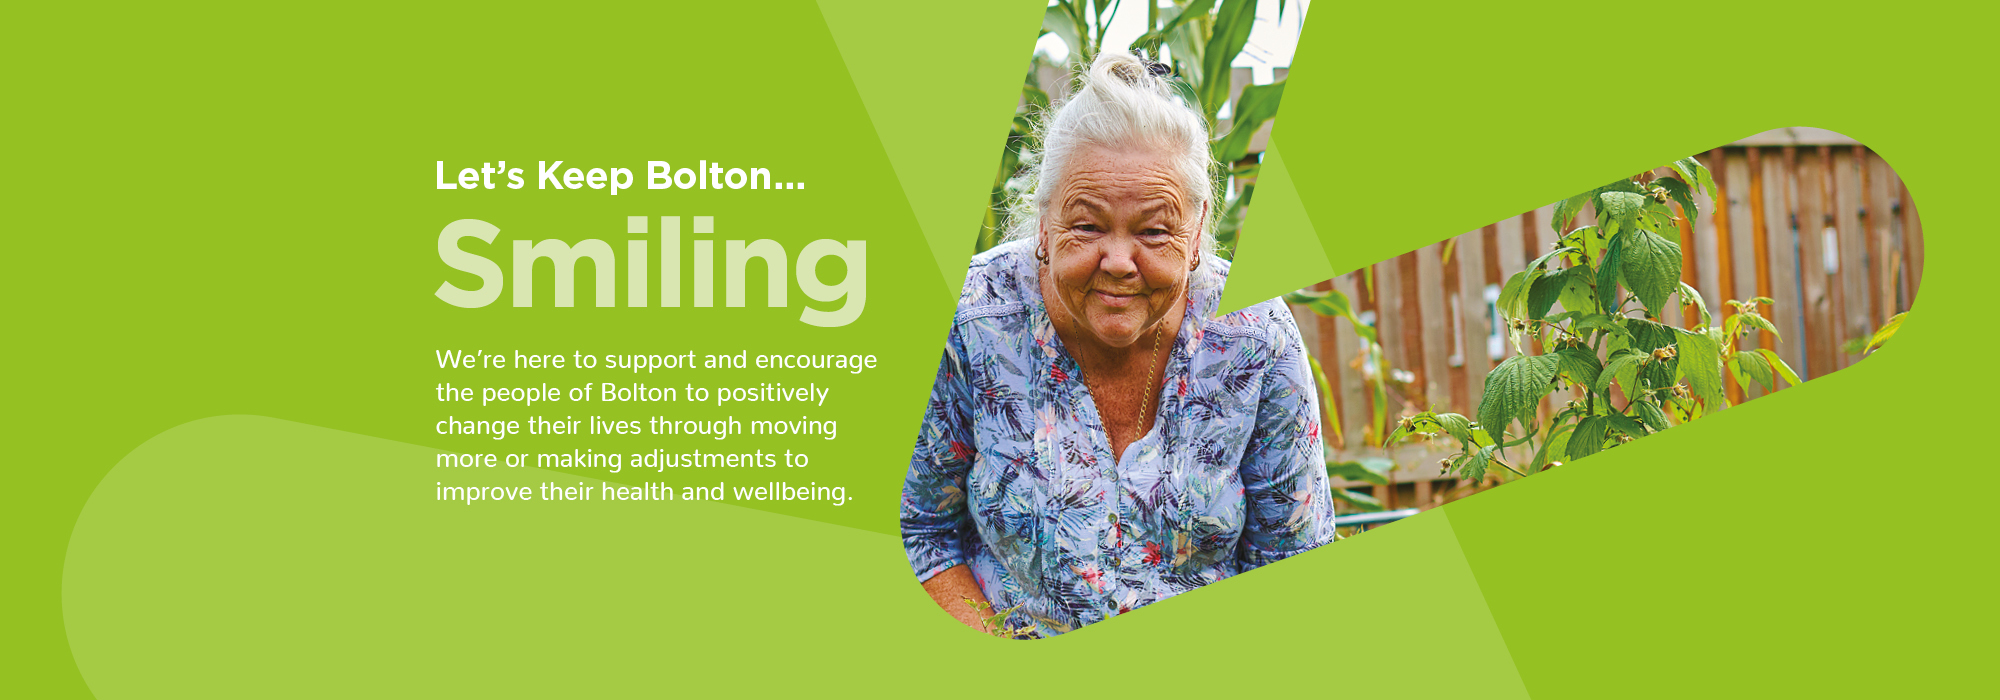 Let's Keep Bolton Smiling - We're here to support and encourage the people of Bolton to posively change their lives through moving more or making adjustments to improve their health and wellbeing.